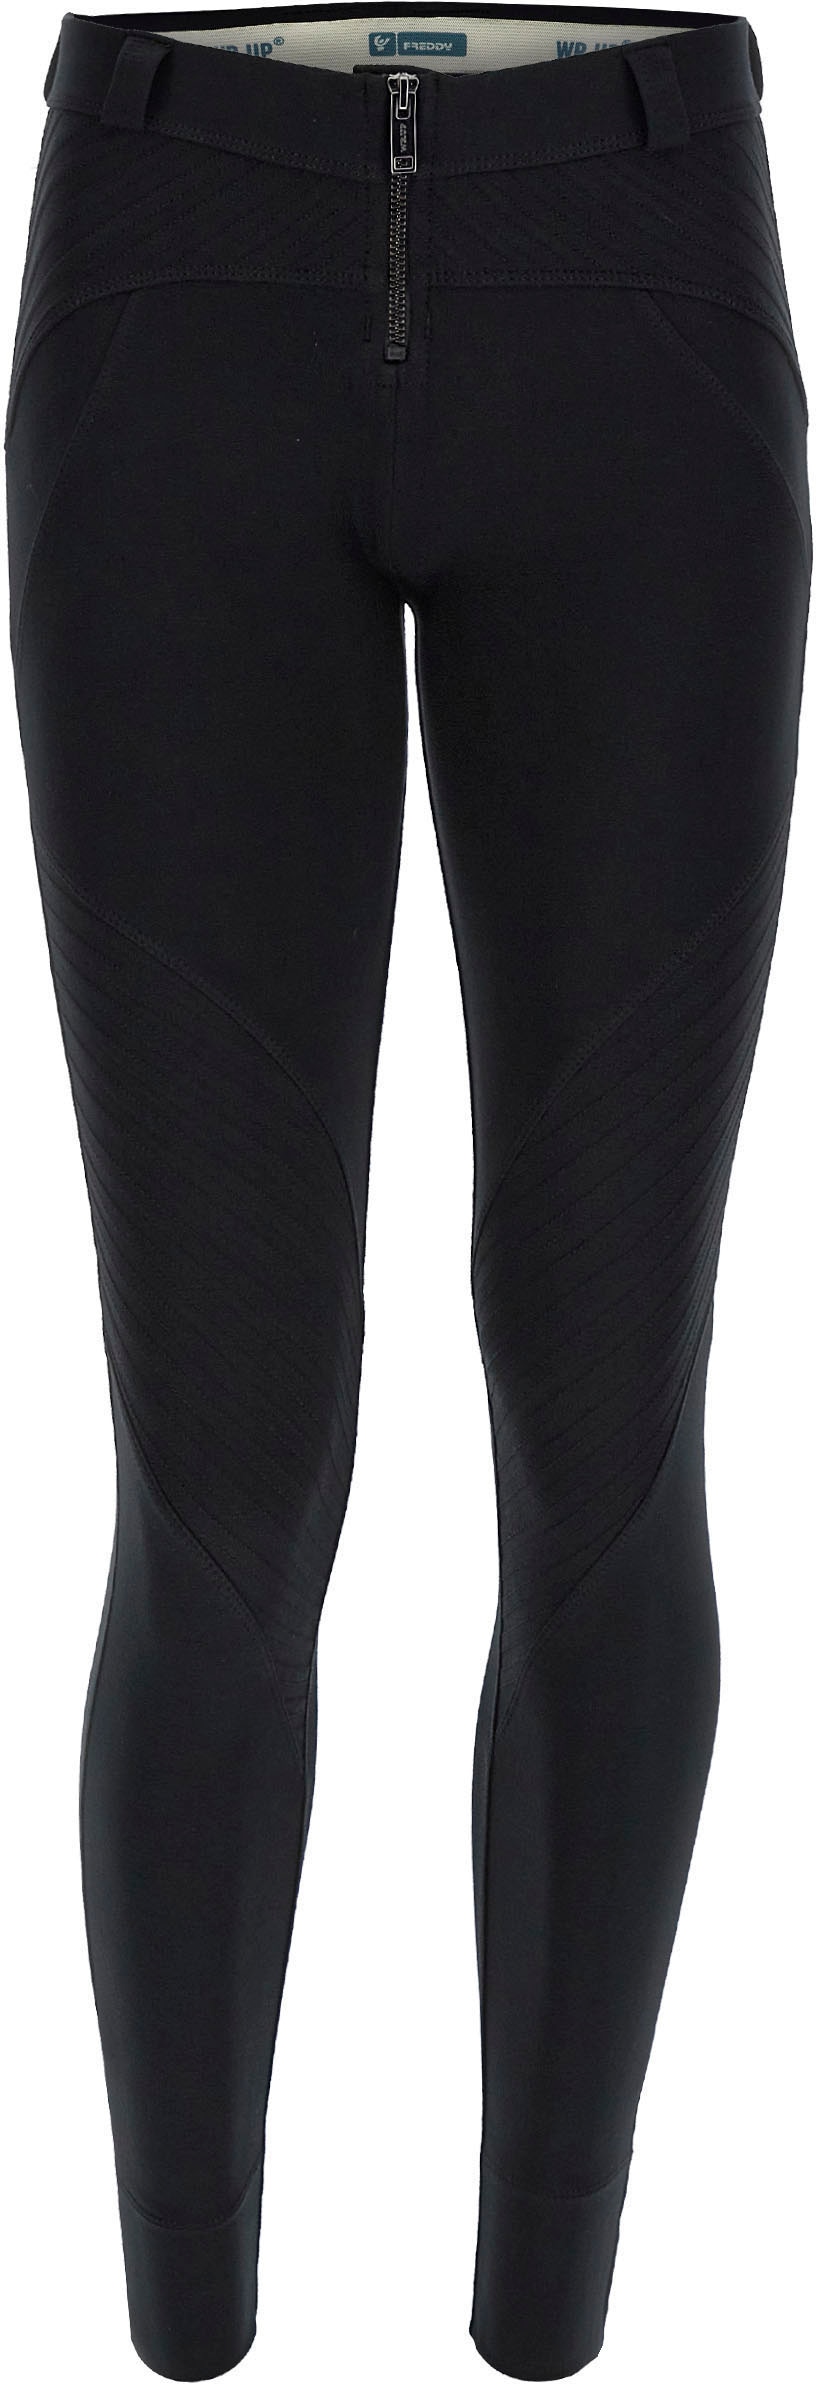 Freddy Jeggings bei Effekt »WRUP2 Lifting mit OTTOversand Shaping SUPERSKINNY«, 